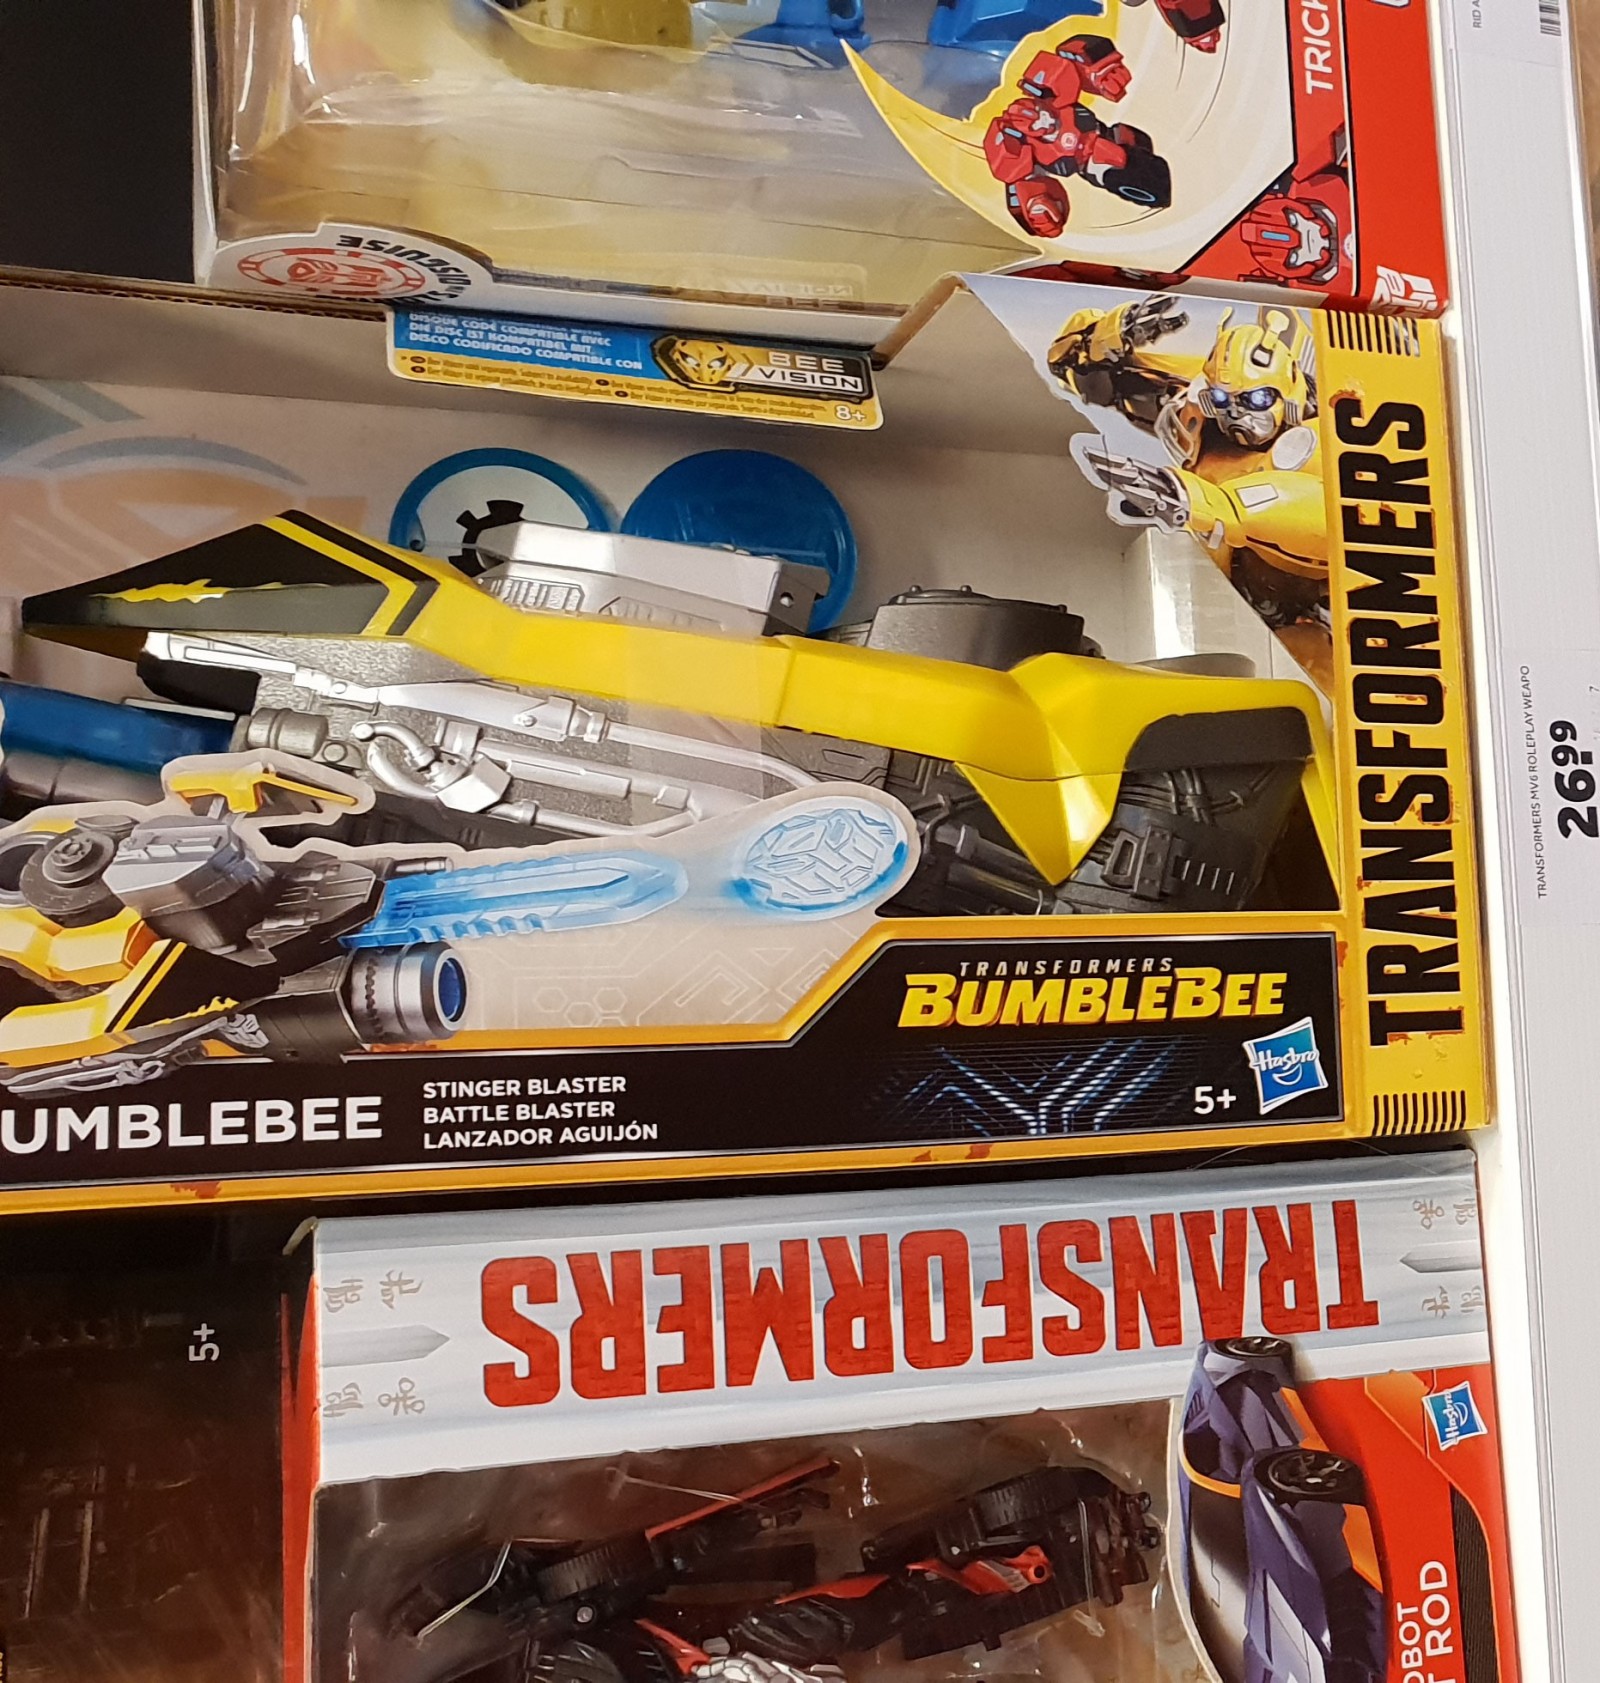 Transformers News: Upcoming Bumblebee Movie toys found in Netherlands